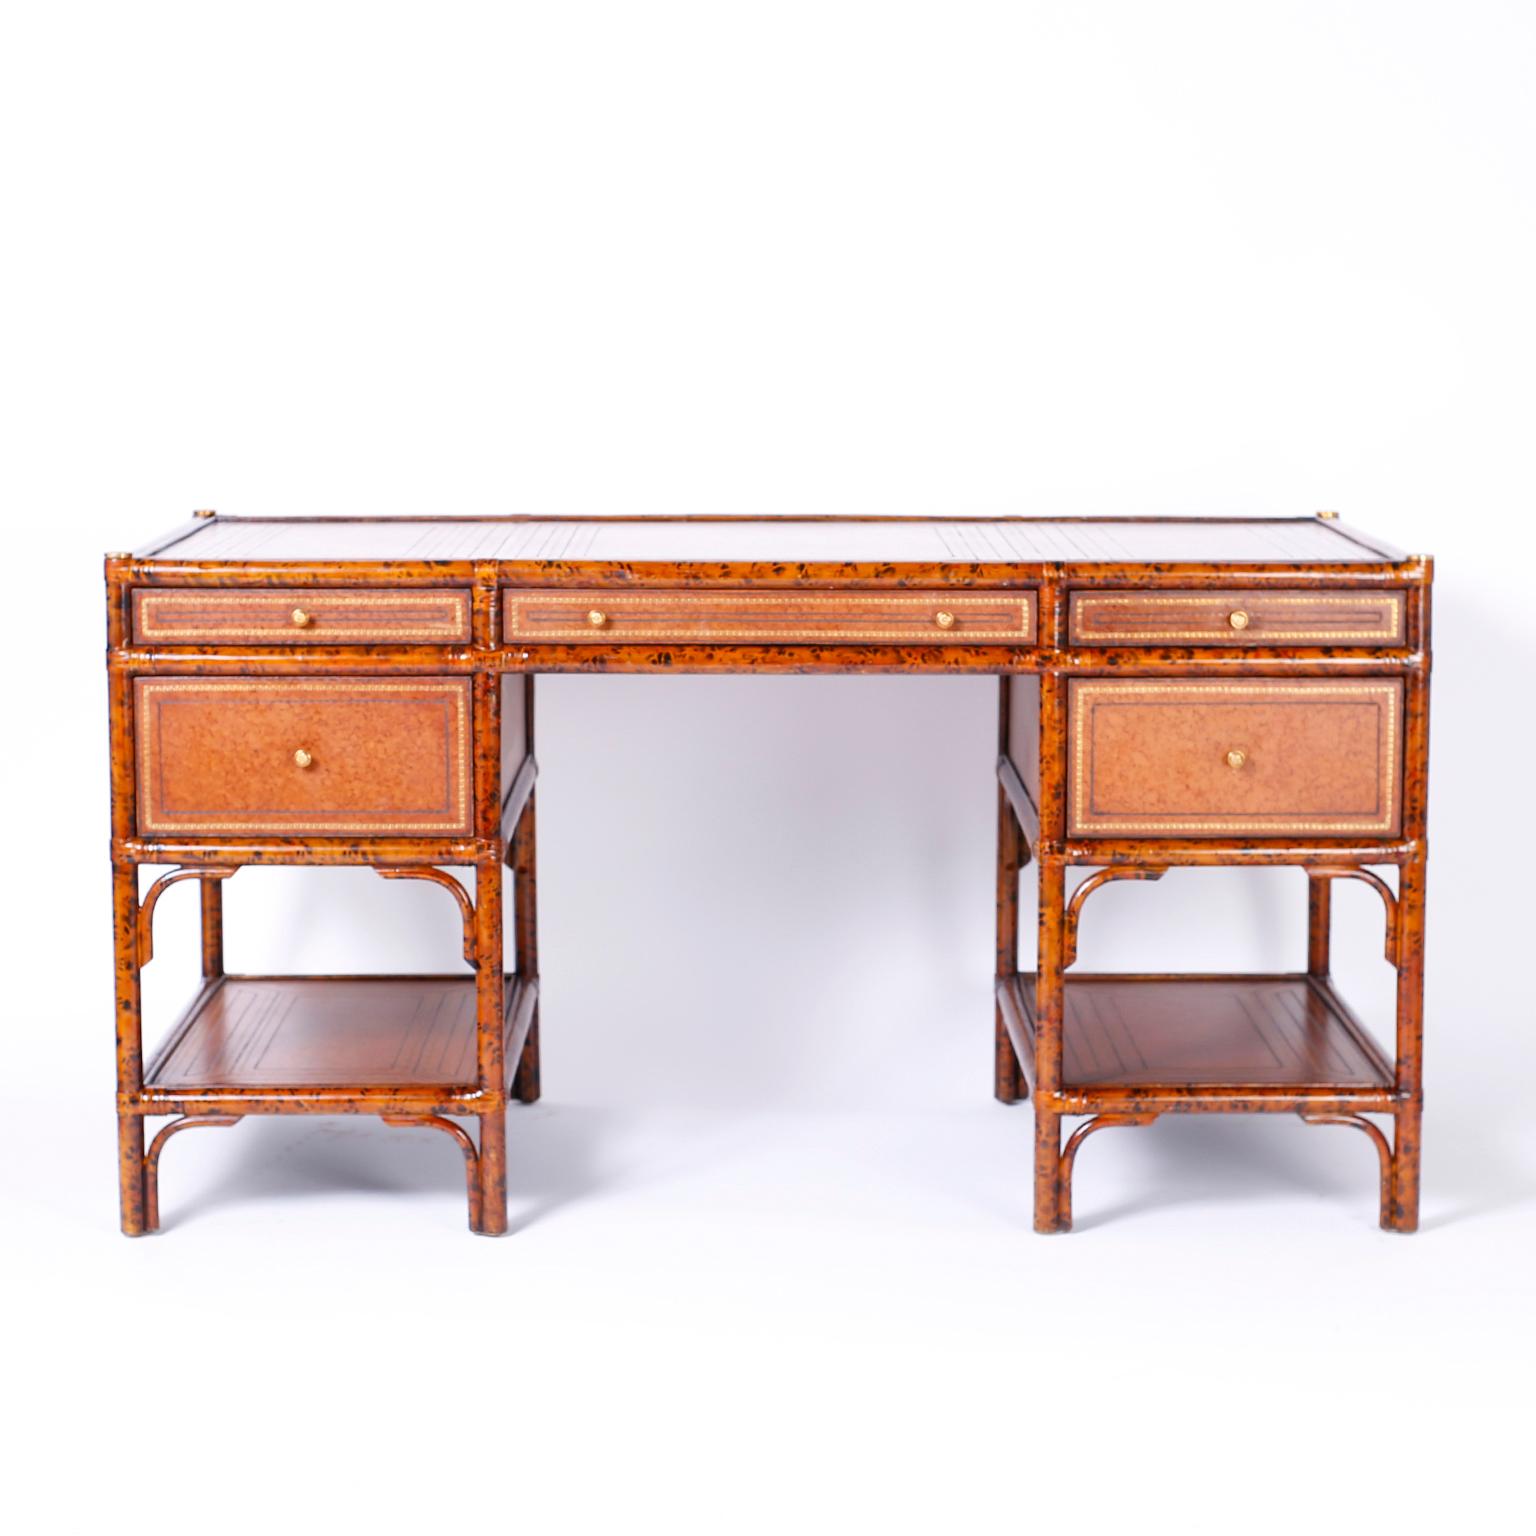 Midcentury kneehole five-drawer desk with a faux tortoise frame featuring a paneled and tooled leather top, drawer fronts, sides and lower tiers. The desk has a finished back and is signed Maitland-Smith in a drawer.